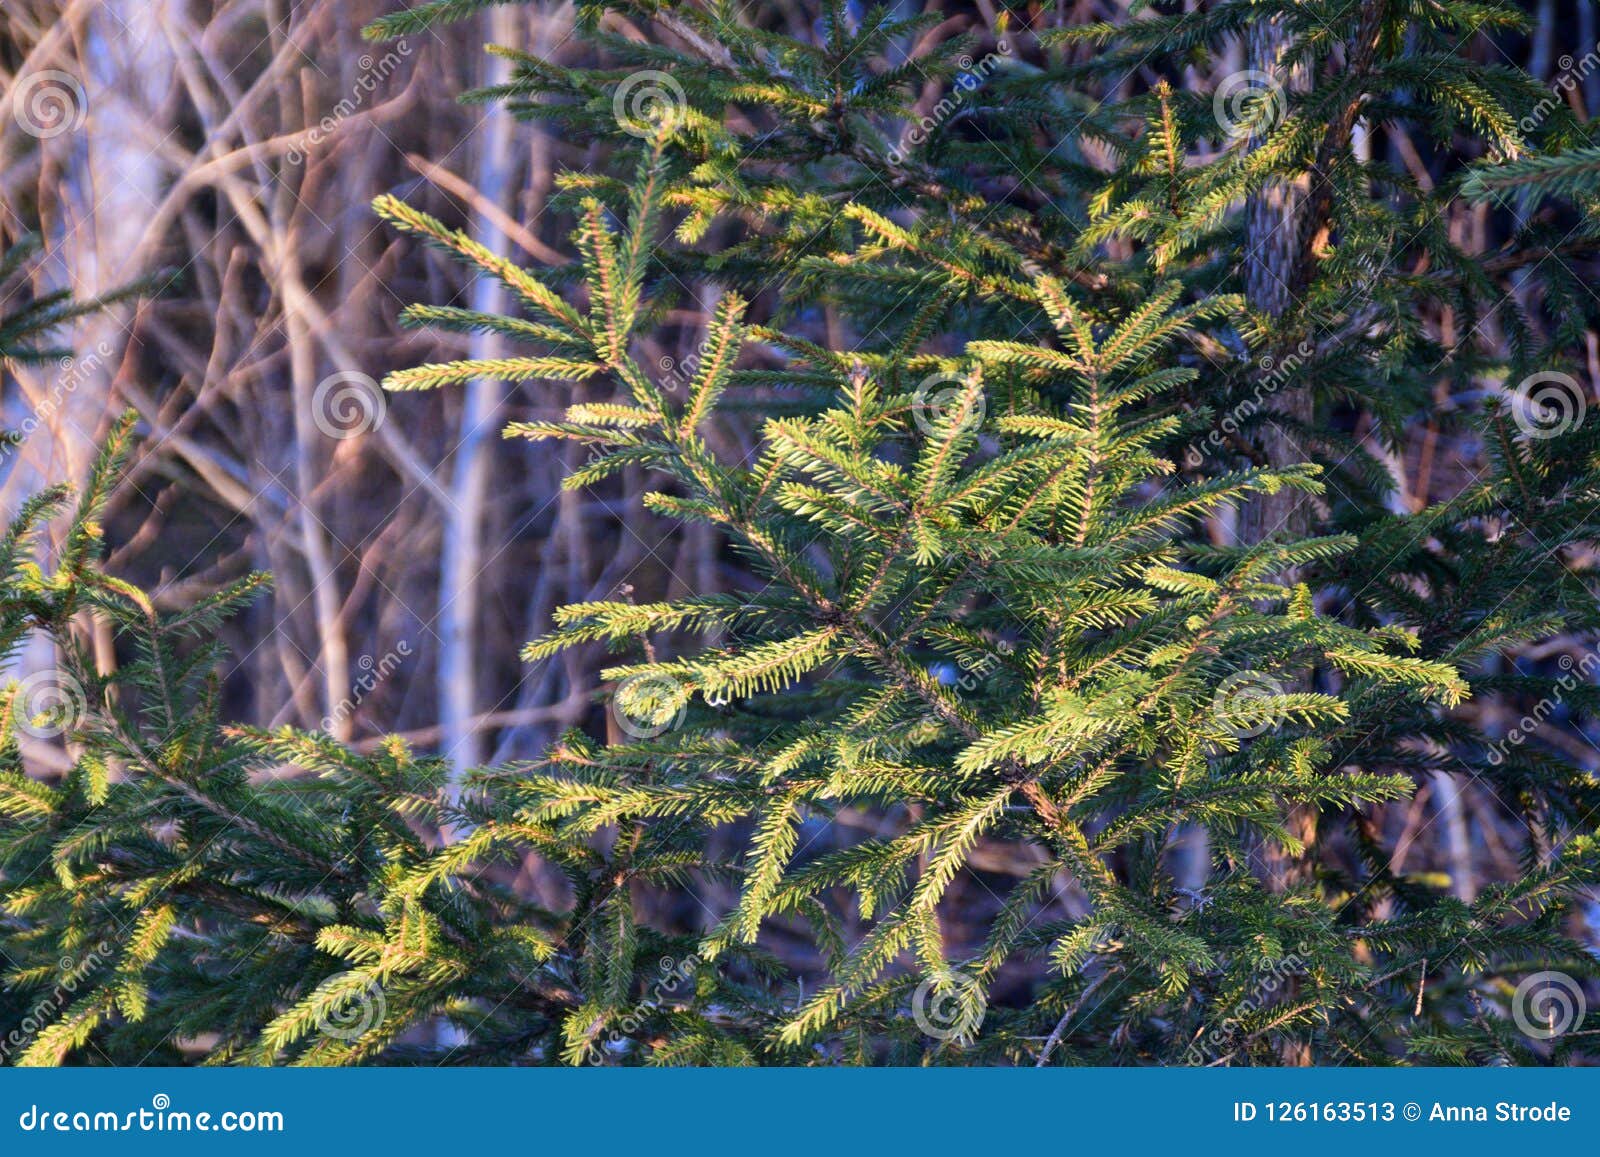 Christmas Trees On A Snowy Winter Day. Stock Image - Image of coniferous, plant: 126163513